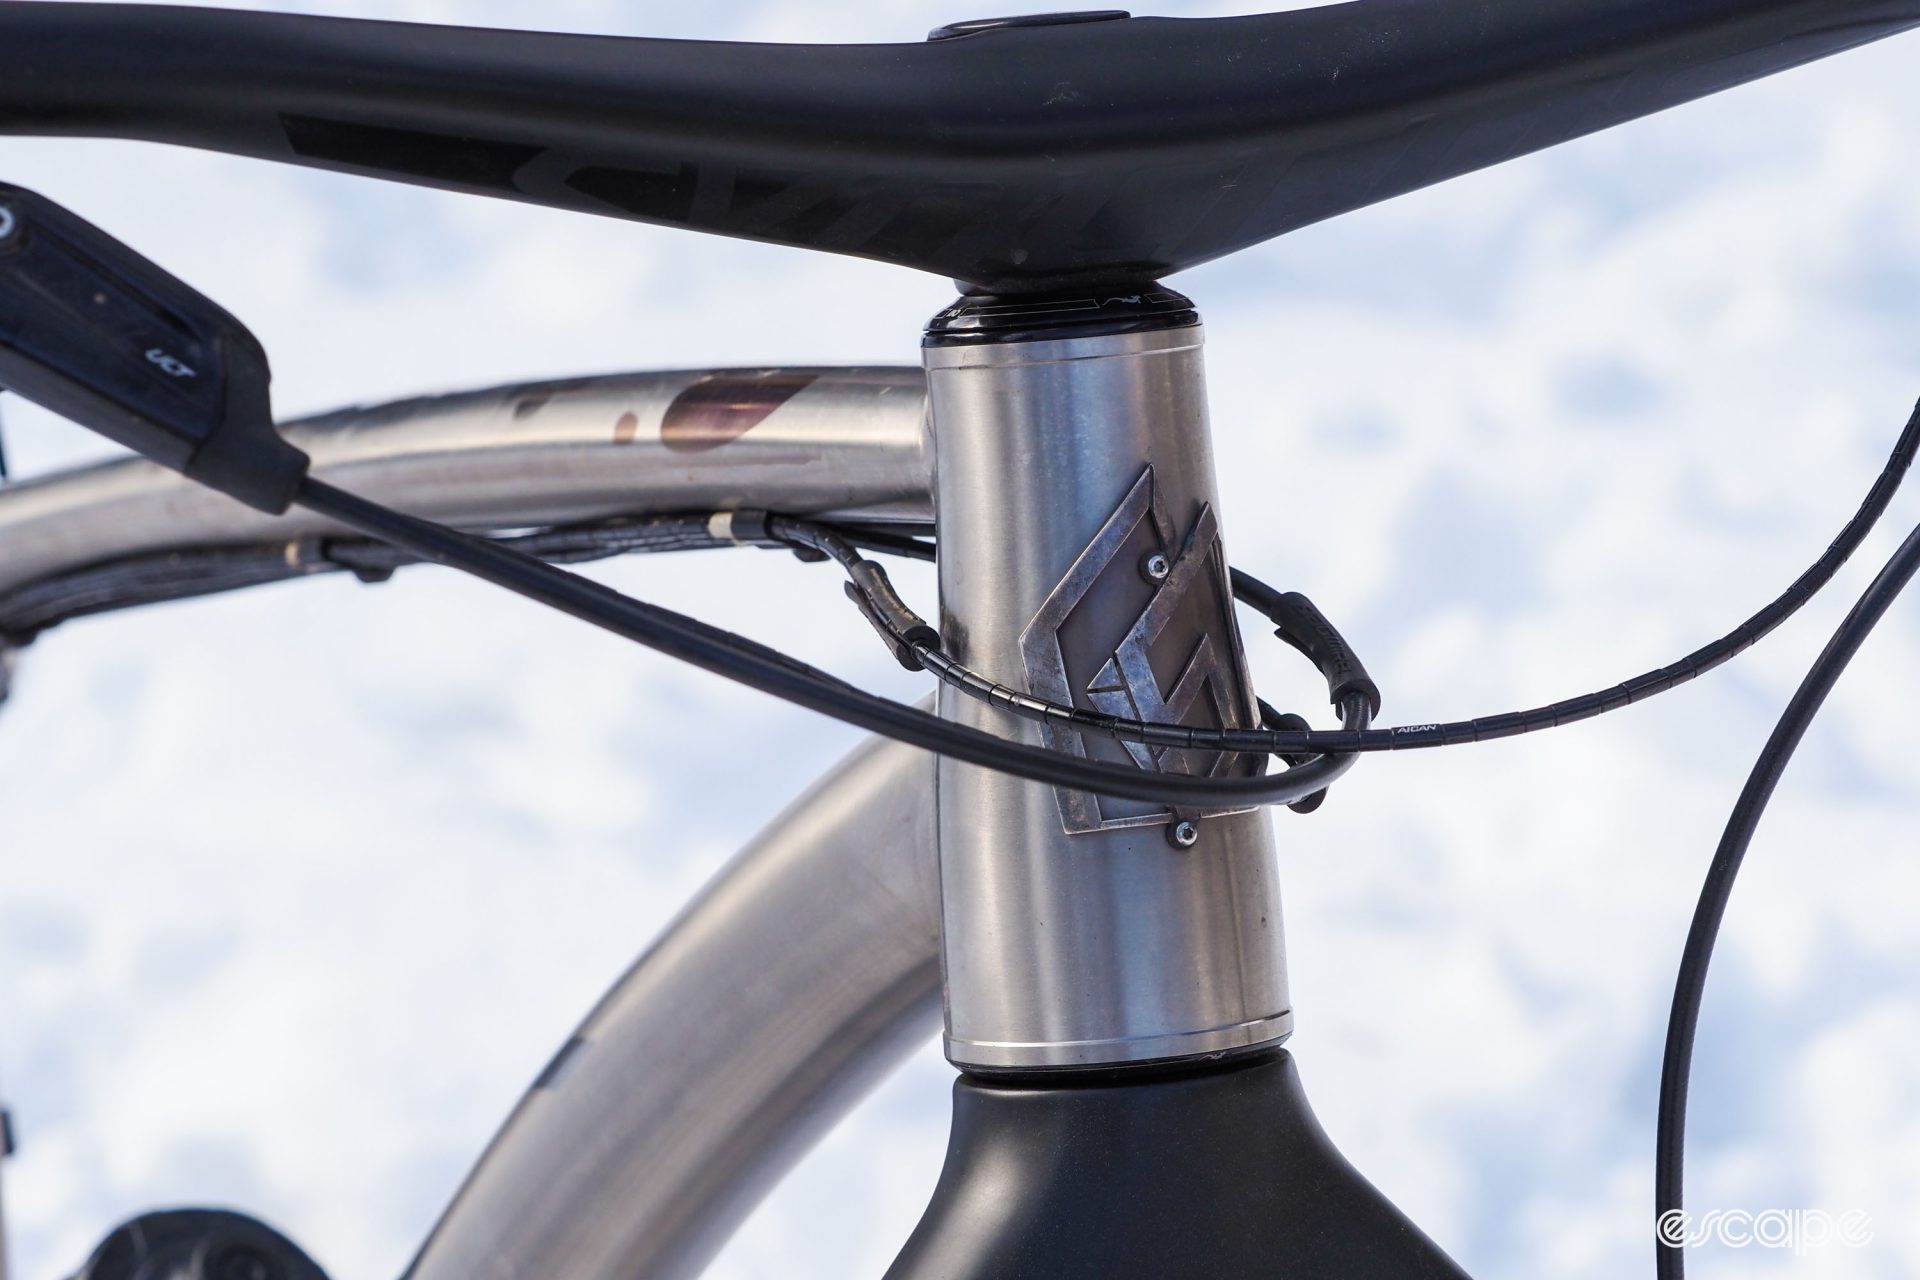 Rise Bikes Grizzly first generation head tube